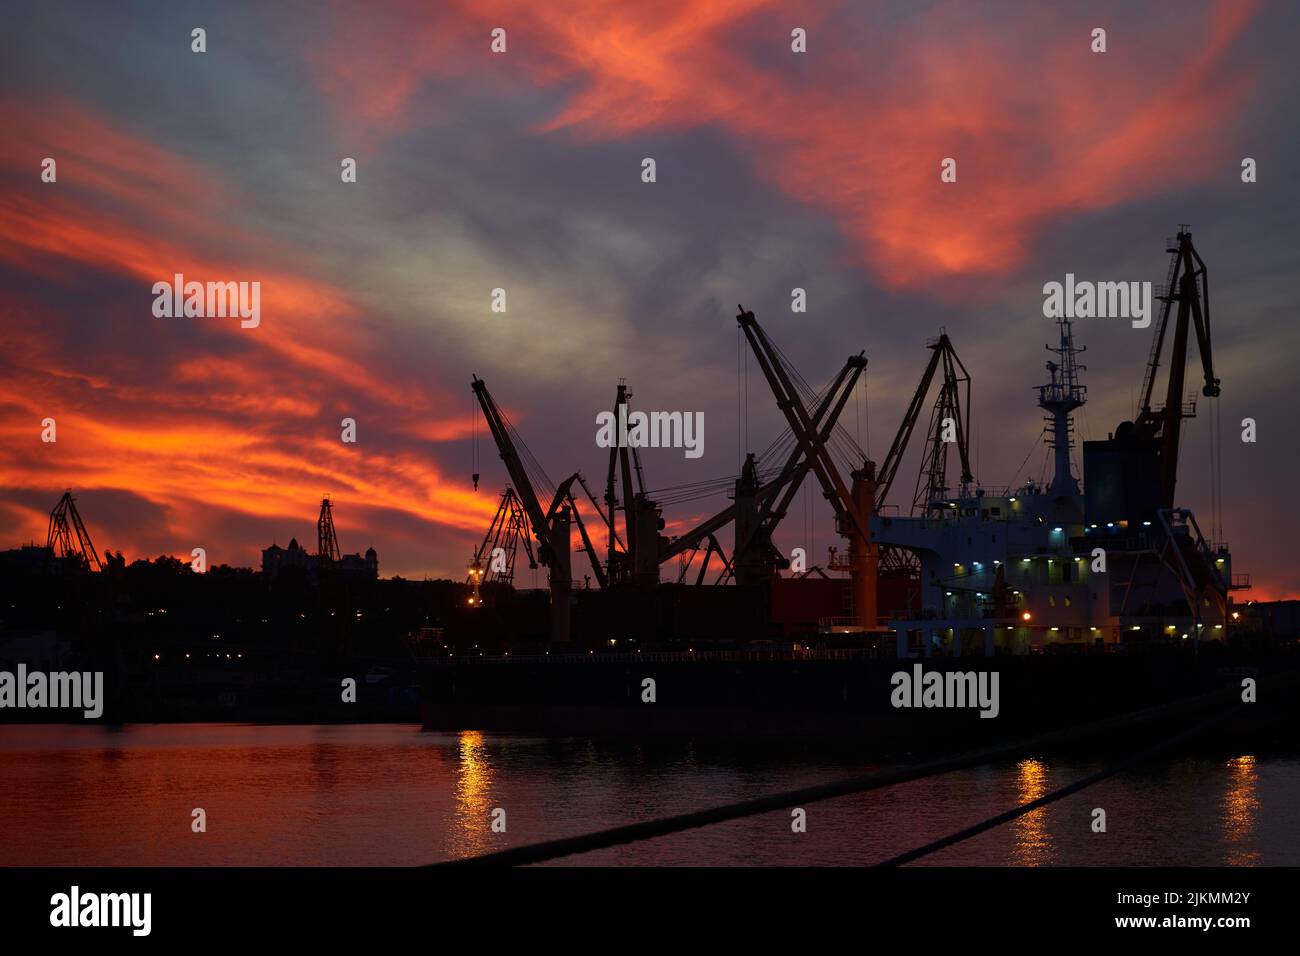 sunset in industrial landscape of commercial seaport. Sunset at seaport. Stock Photo